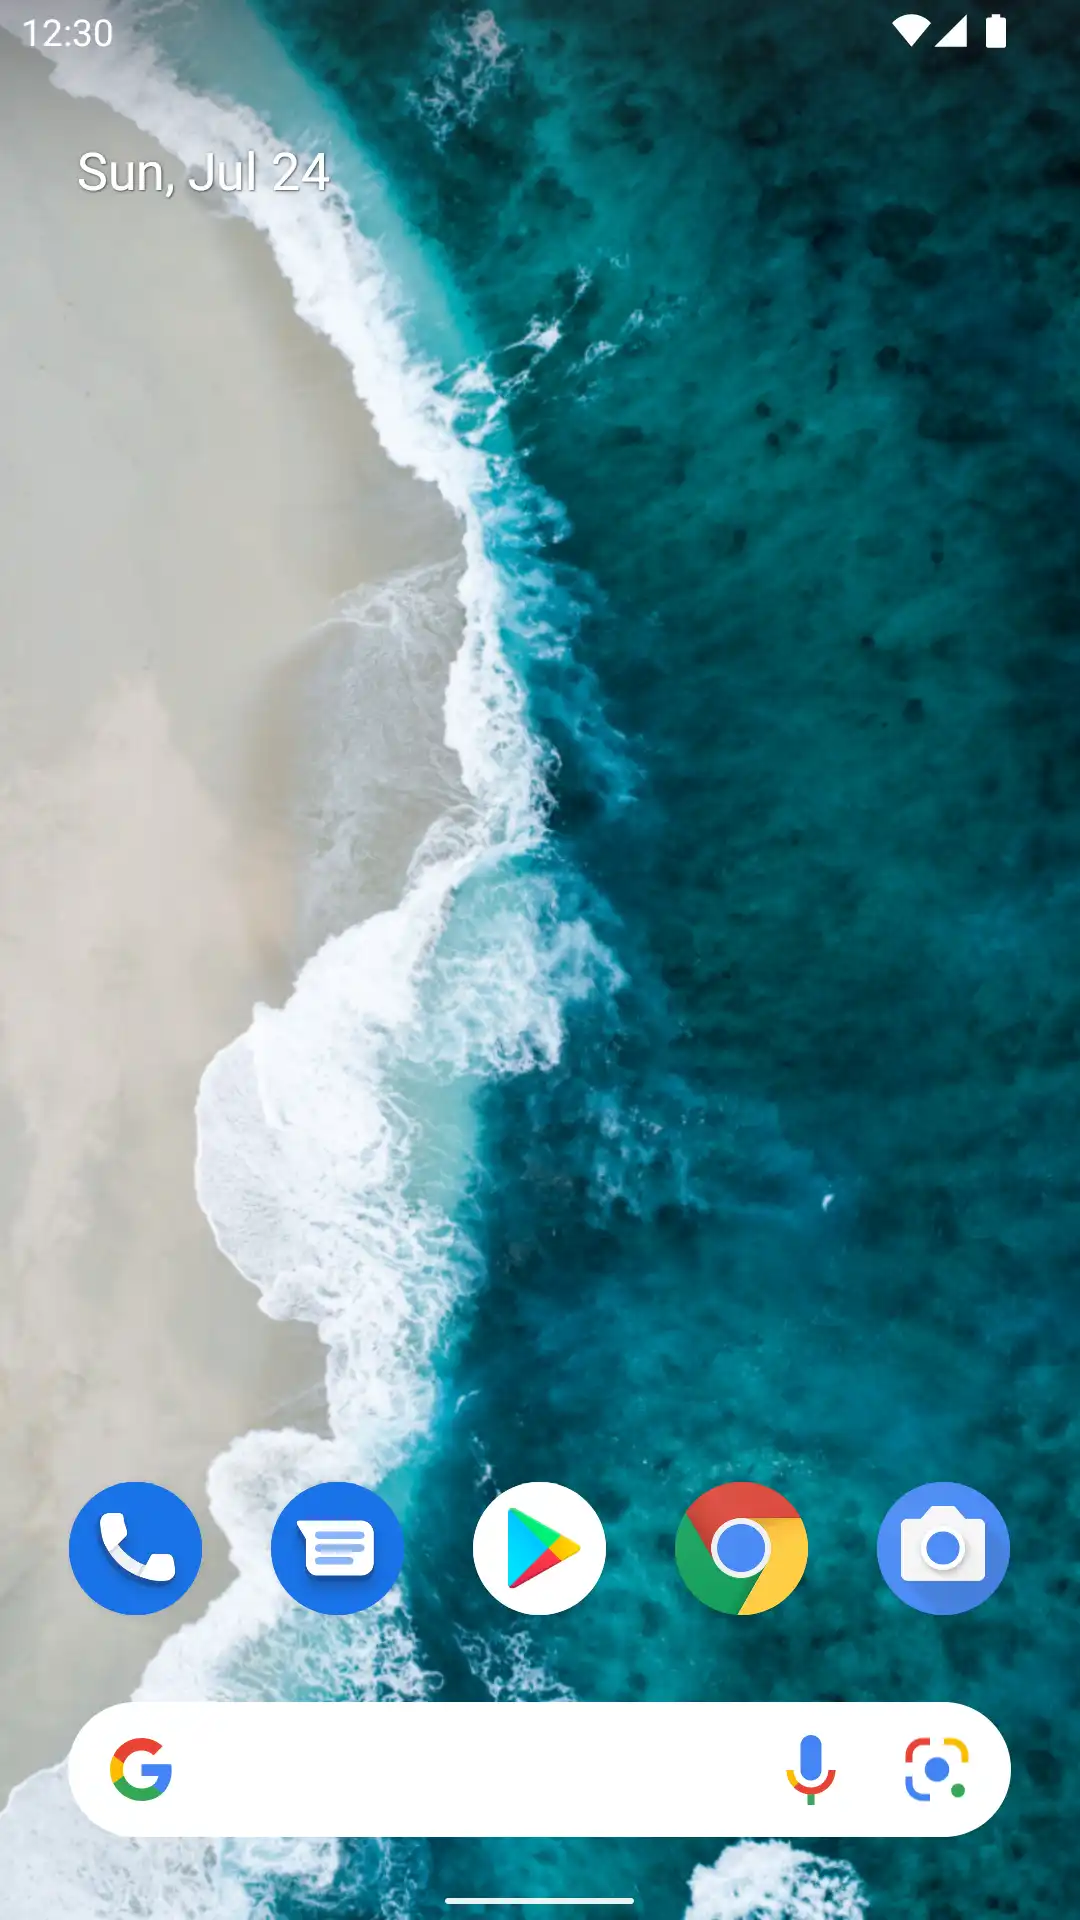 A screenshot of Android's homescreen